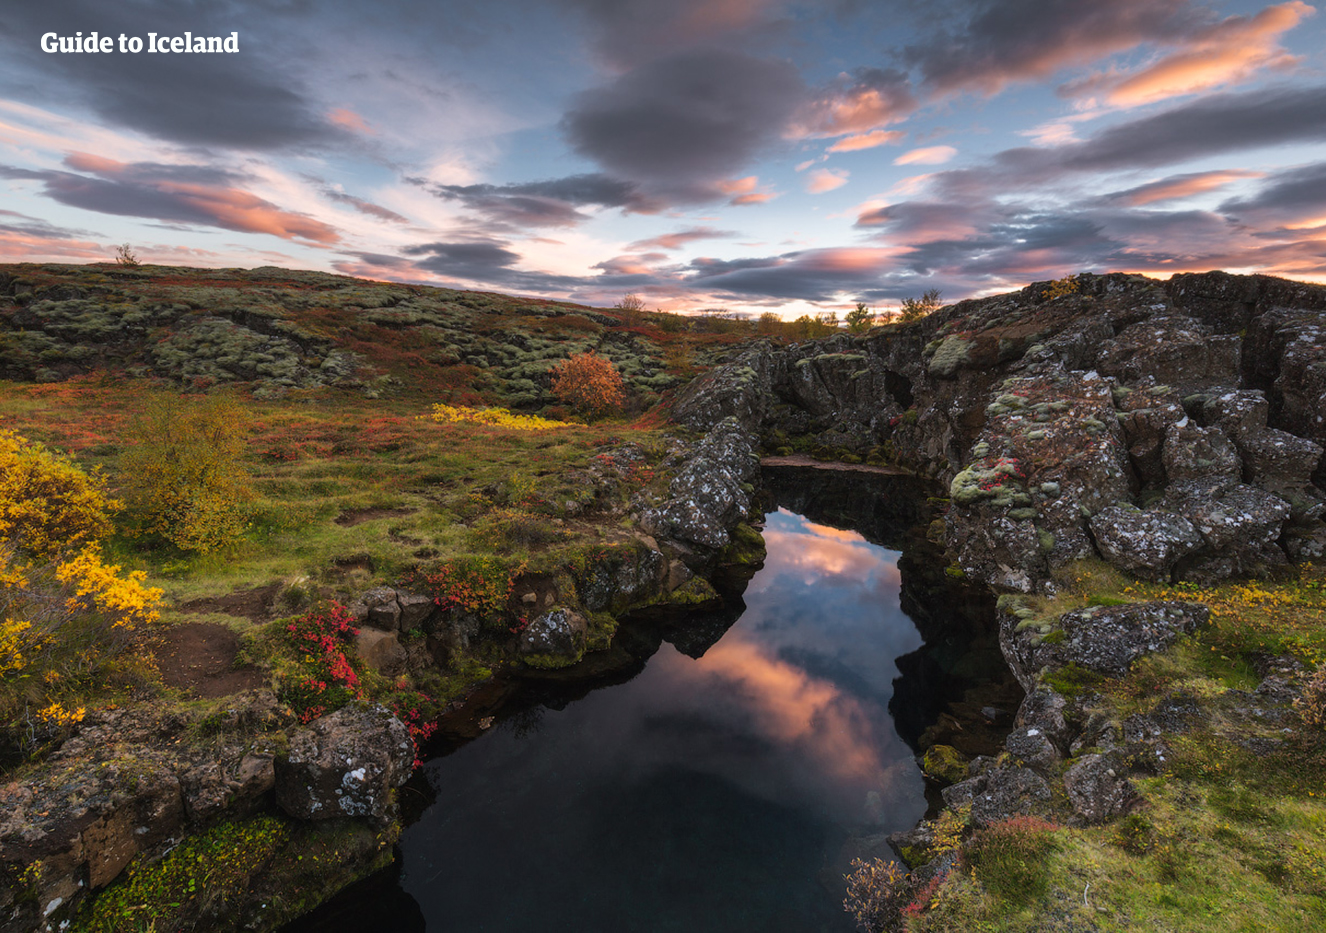 10 Iceland Travel Tips for an Amazing Vacation